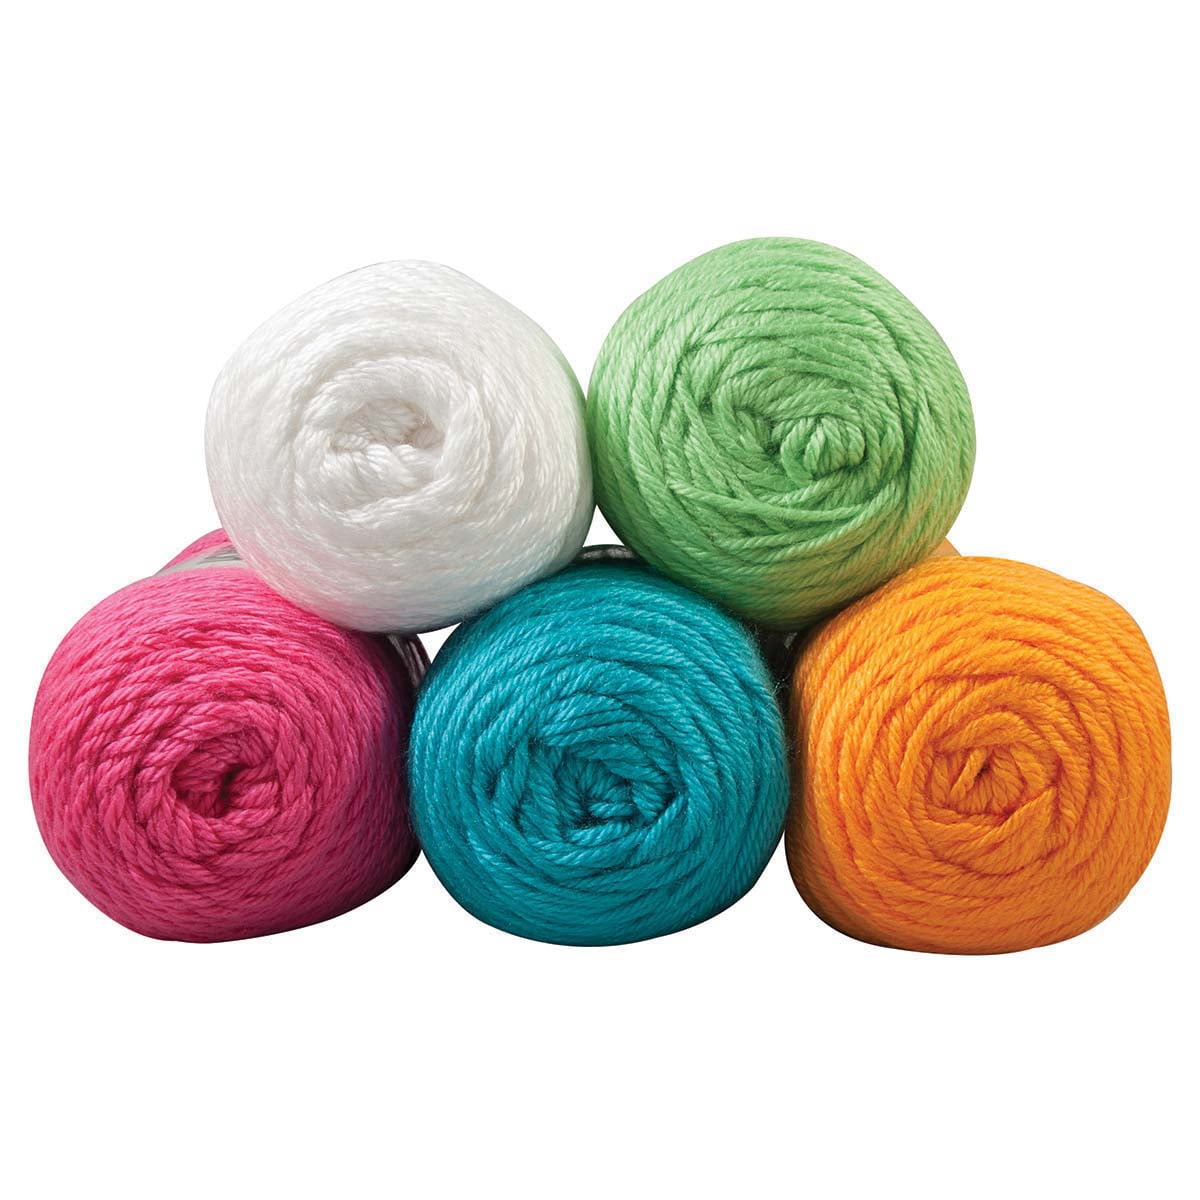 Caron Simply Soft Yarn Pack, Size: 8, Pink